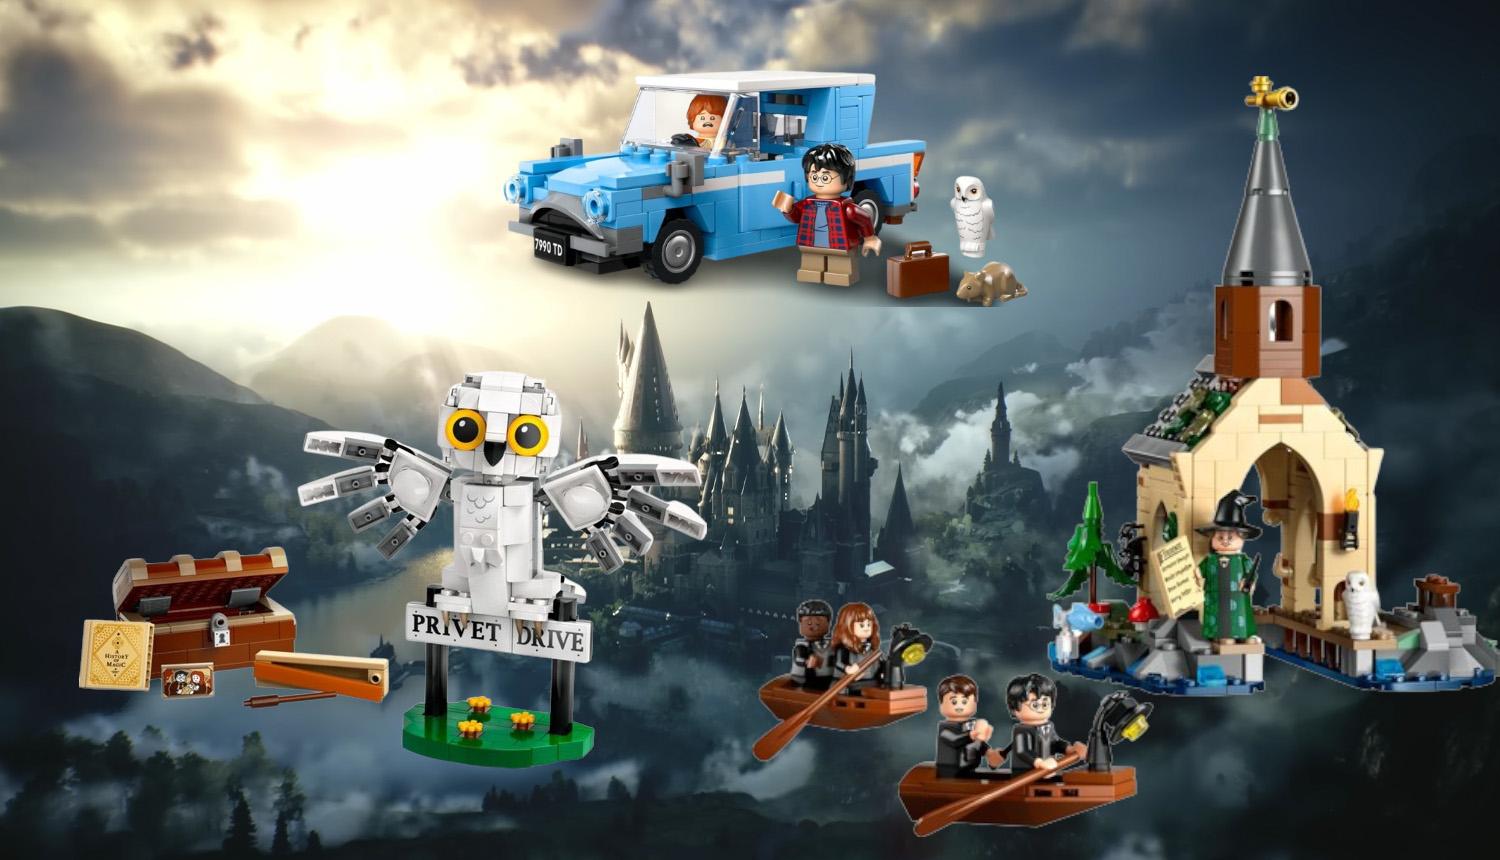 LEGO Harry Potter 2024 - 9 Sets Expected to Release Next Year